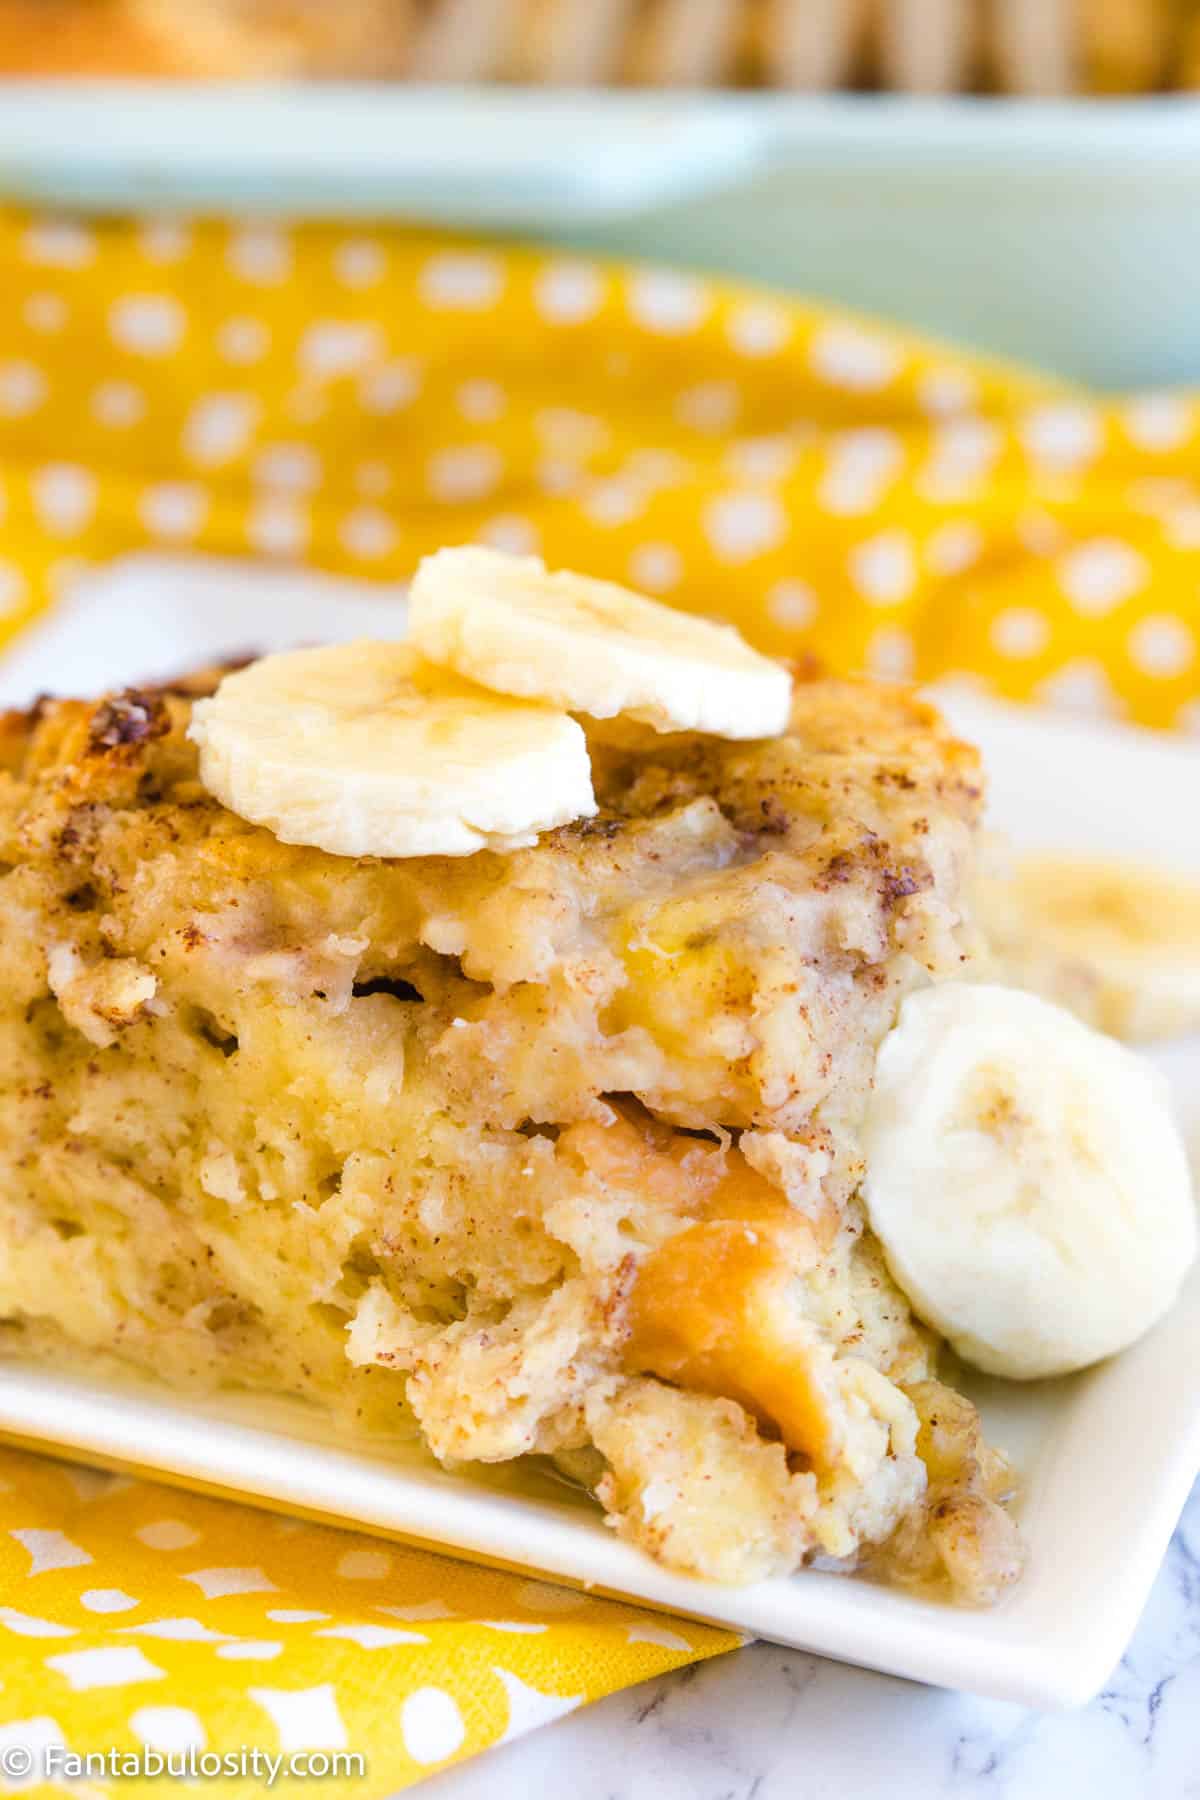 Slice of banana bread pudding on white plate